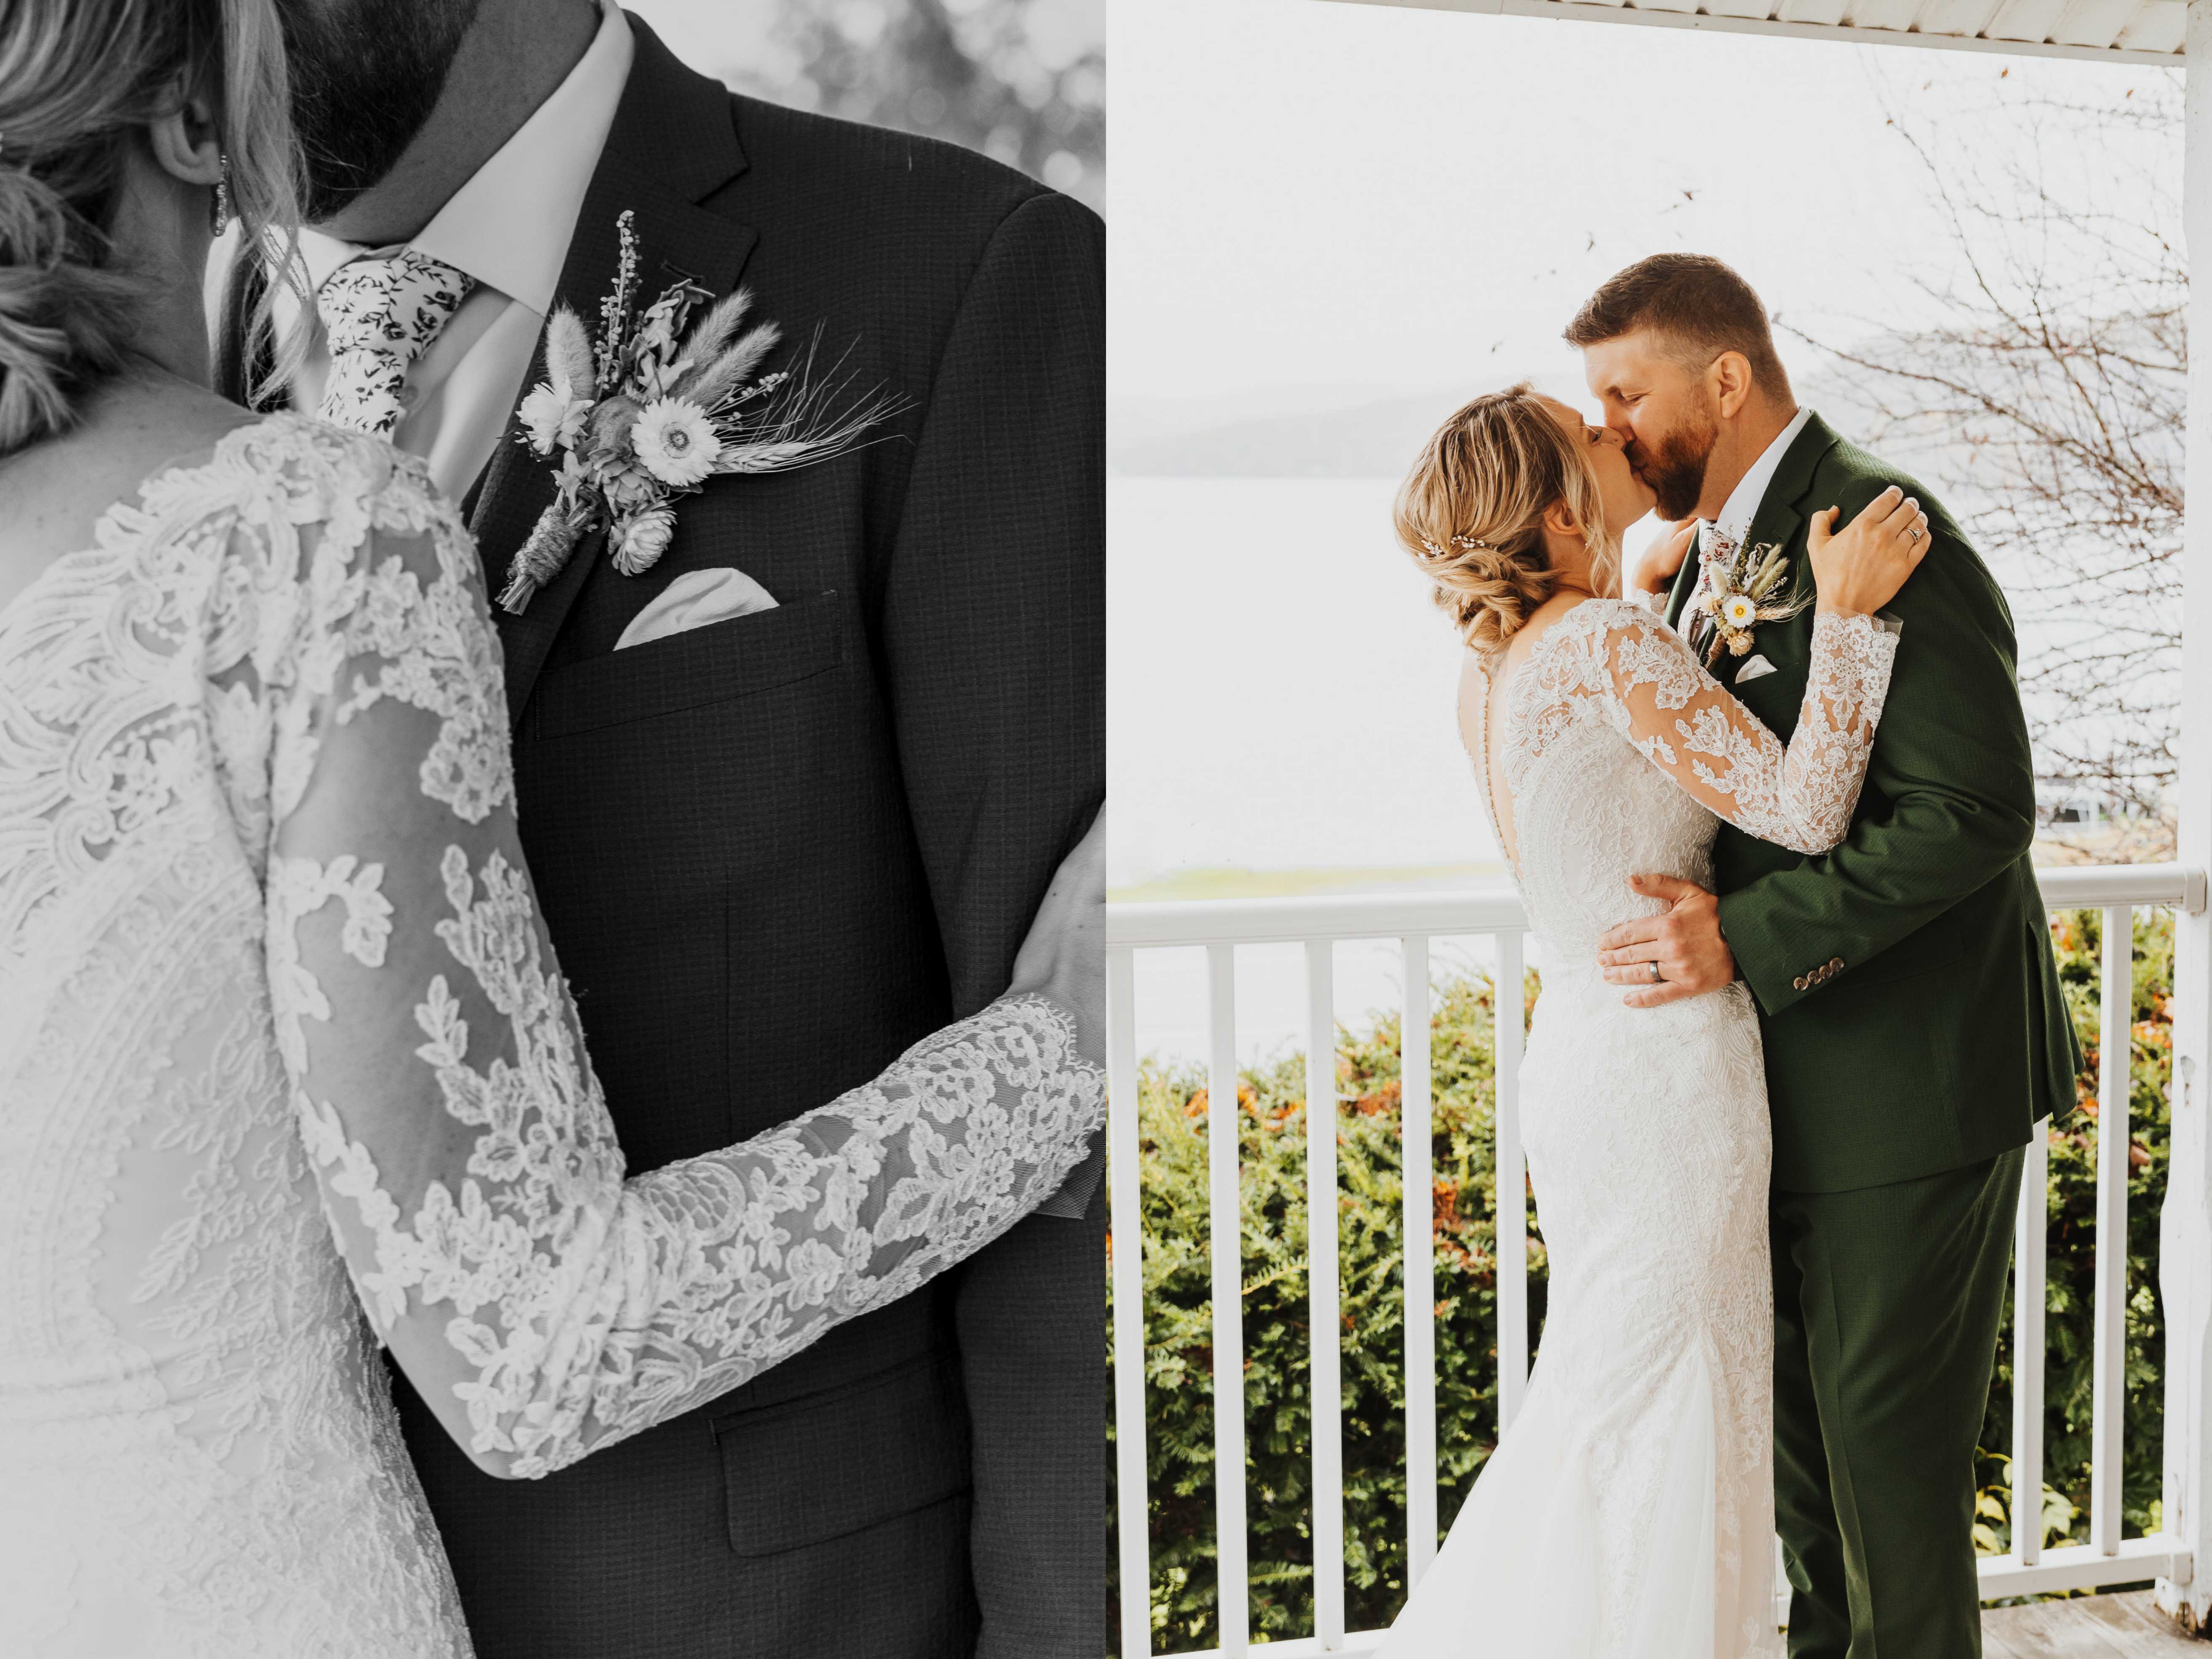 2 photos side by side, the left is a black and white close up photo of a bride and groom kissing, the right is a photo in color of them kissing taken further back